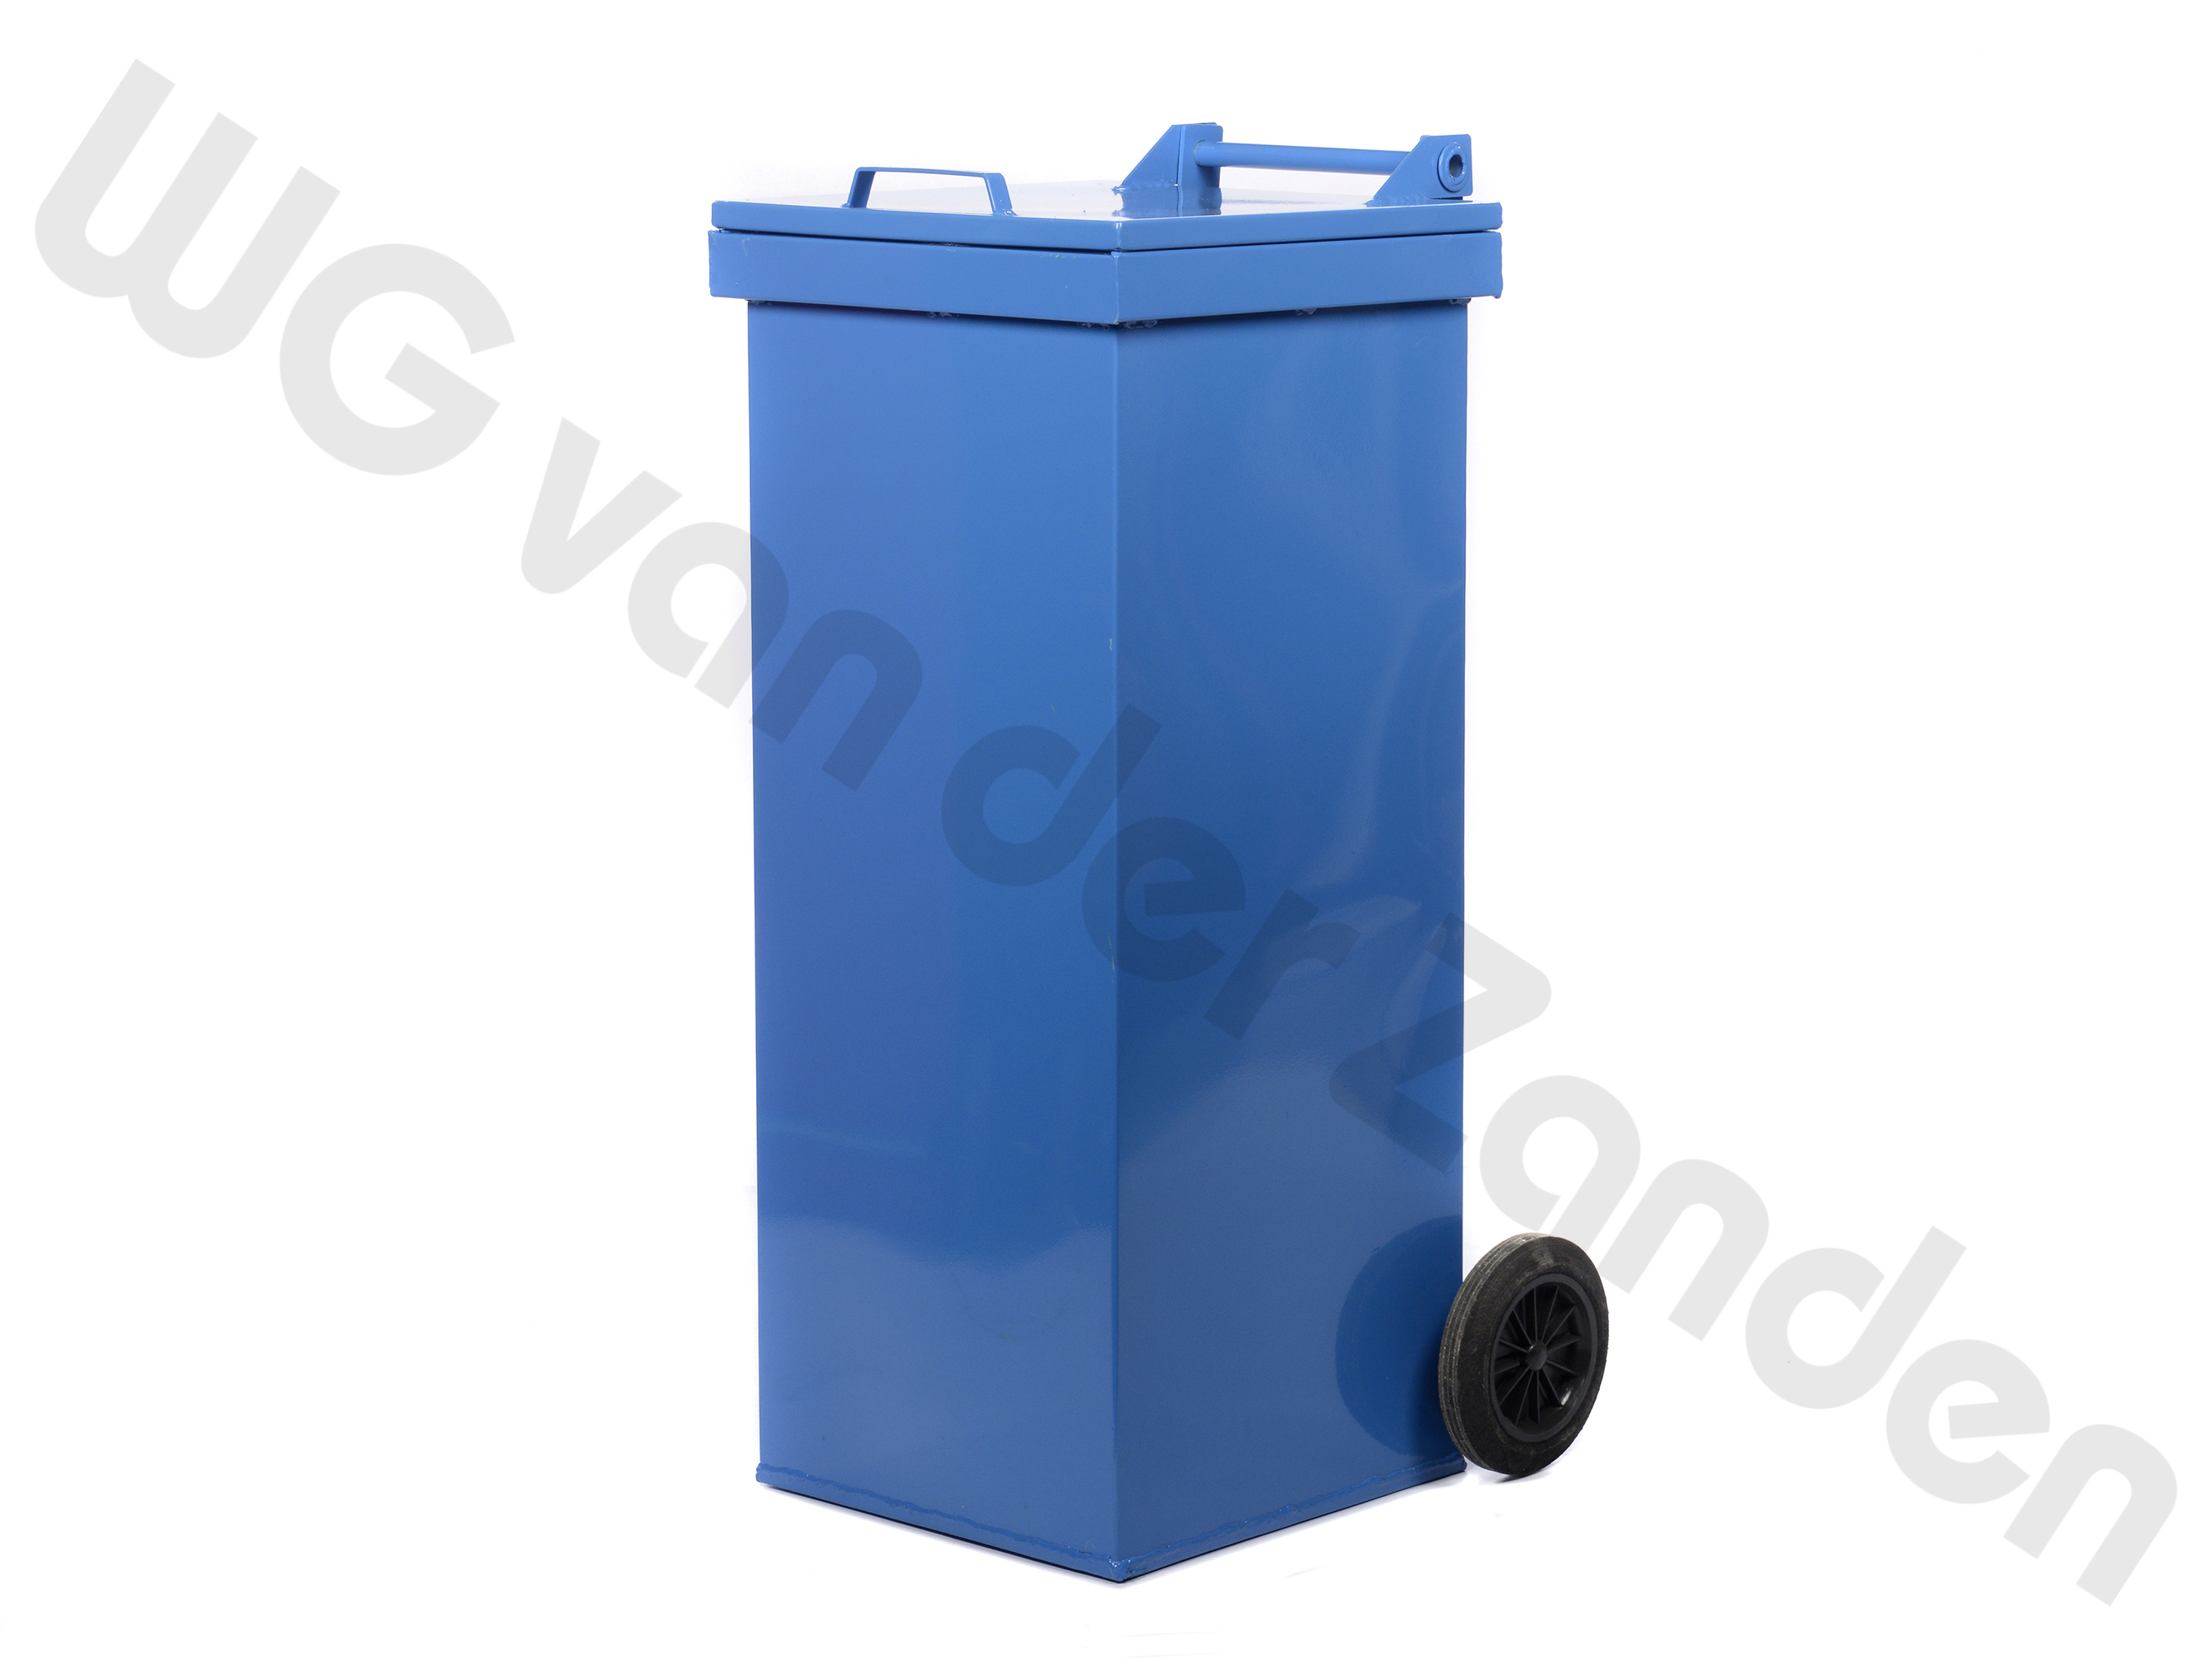 440065 AFVALCONTAINER 120 LTR METAAL M/WIEL BLAUW